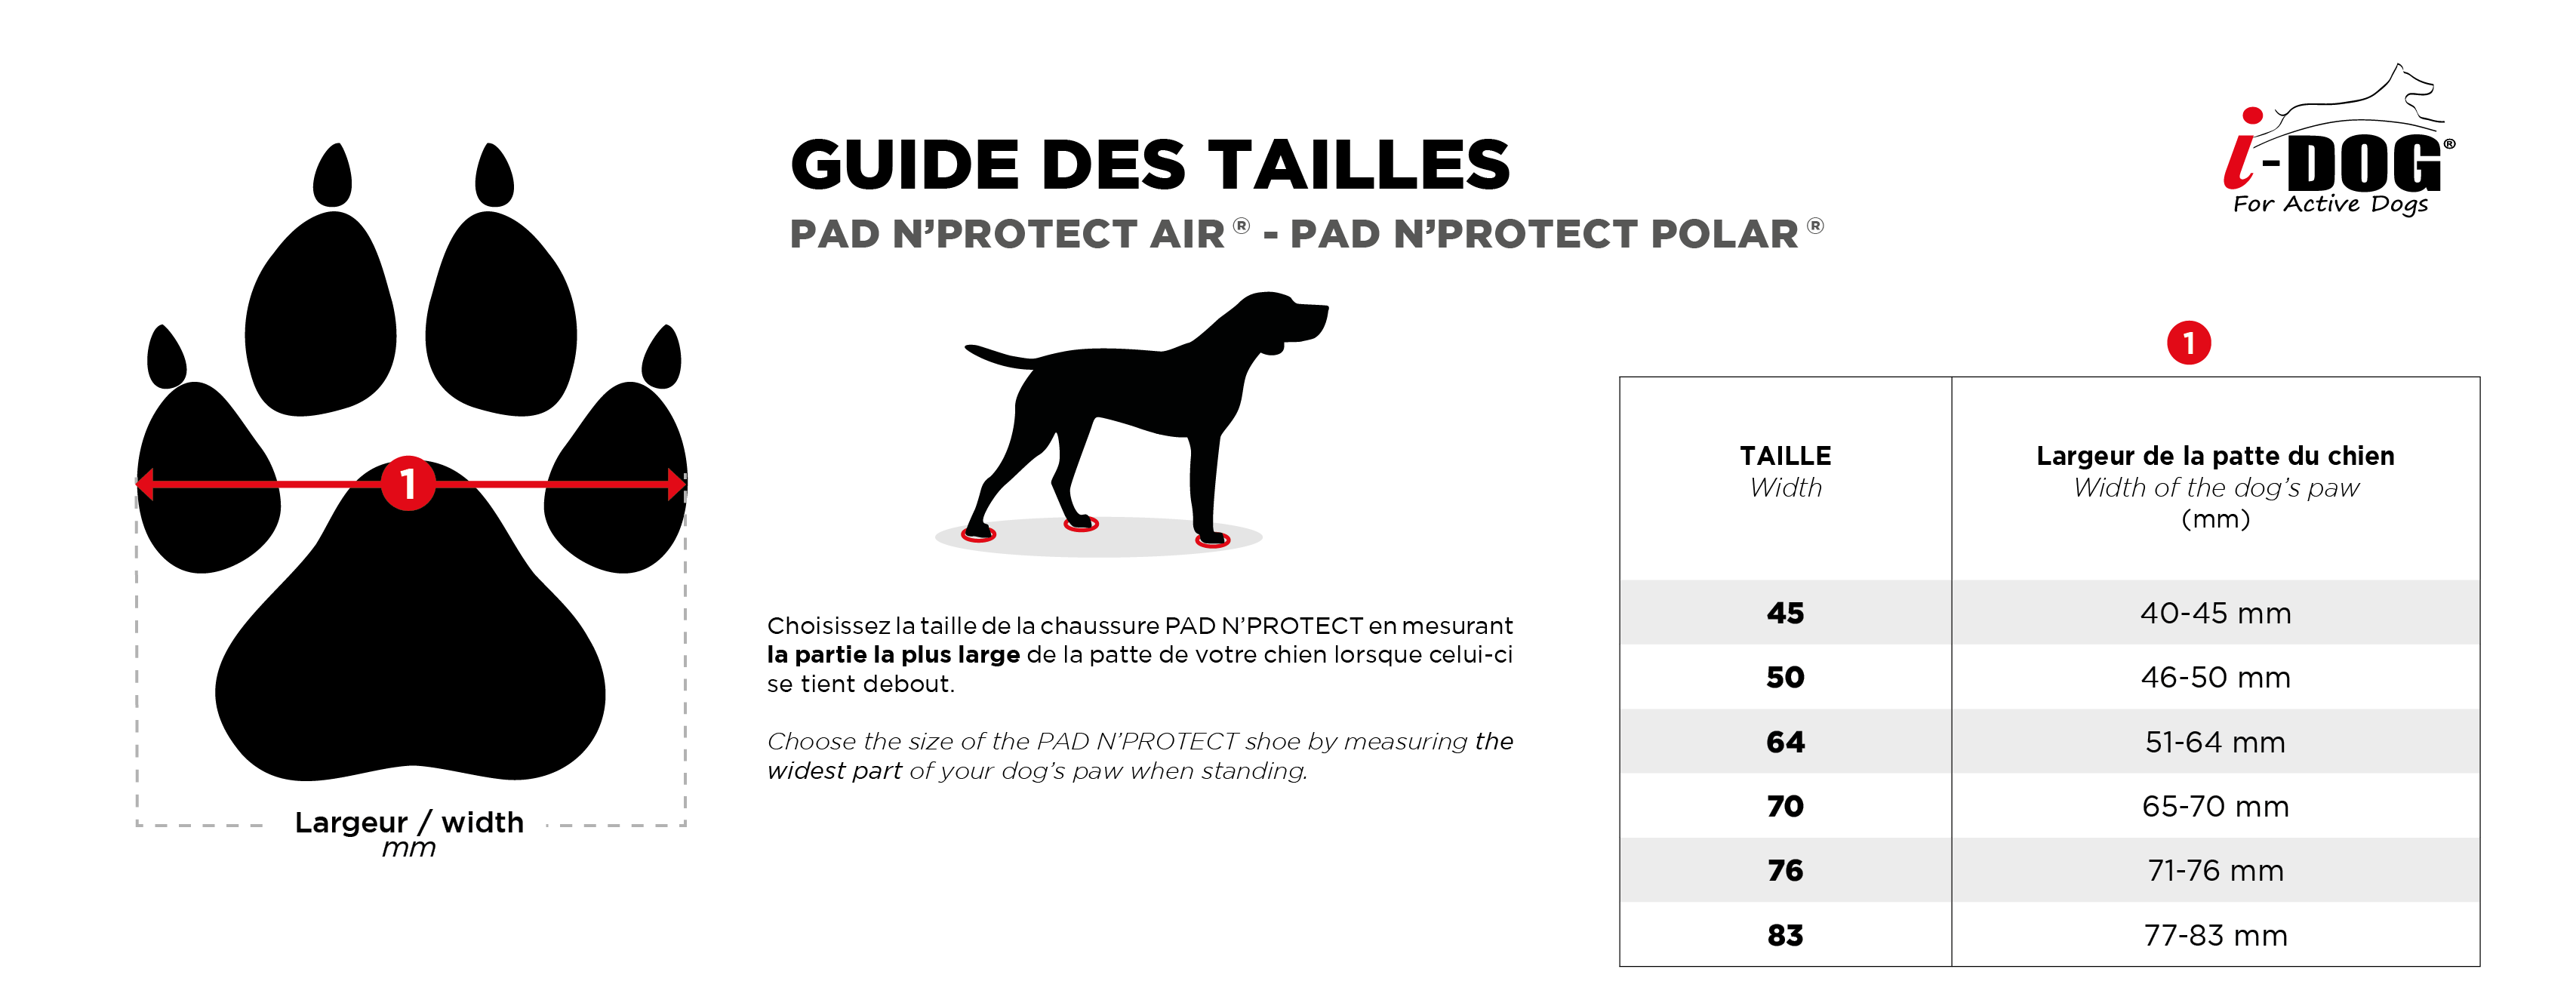 Guide des tailles PAD N'PROTECT